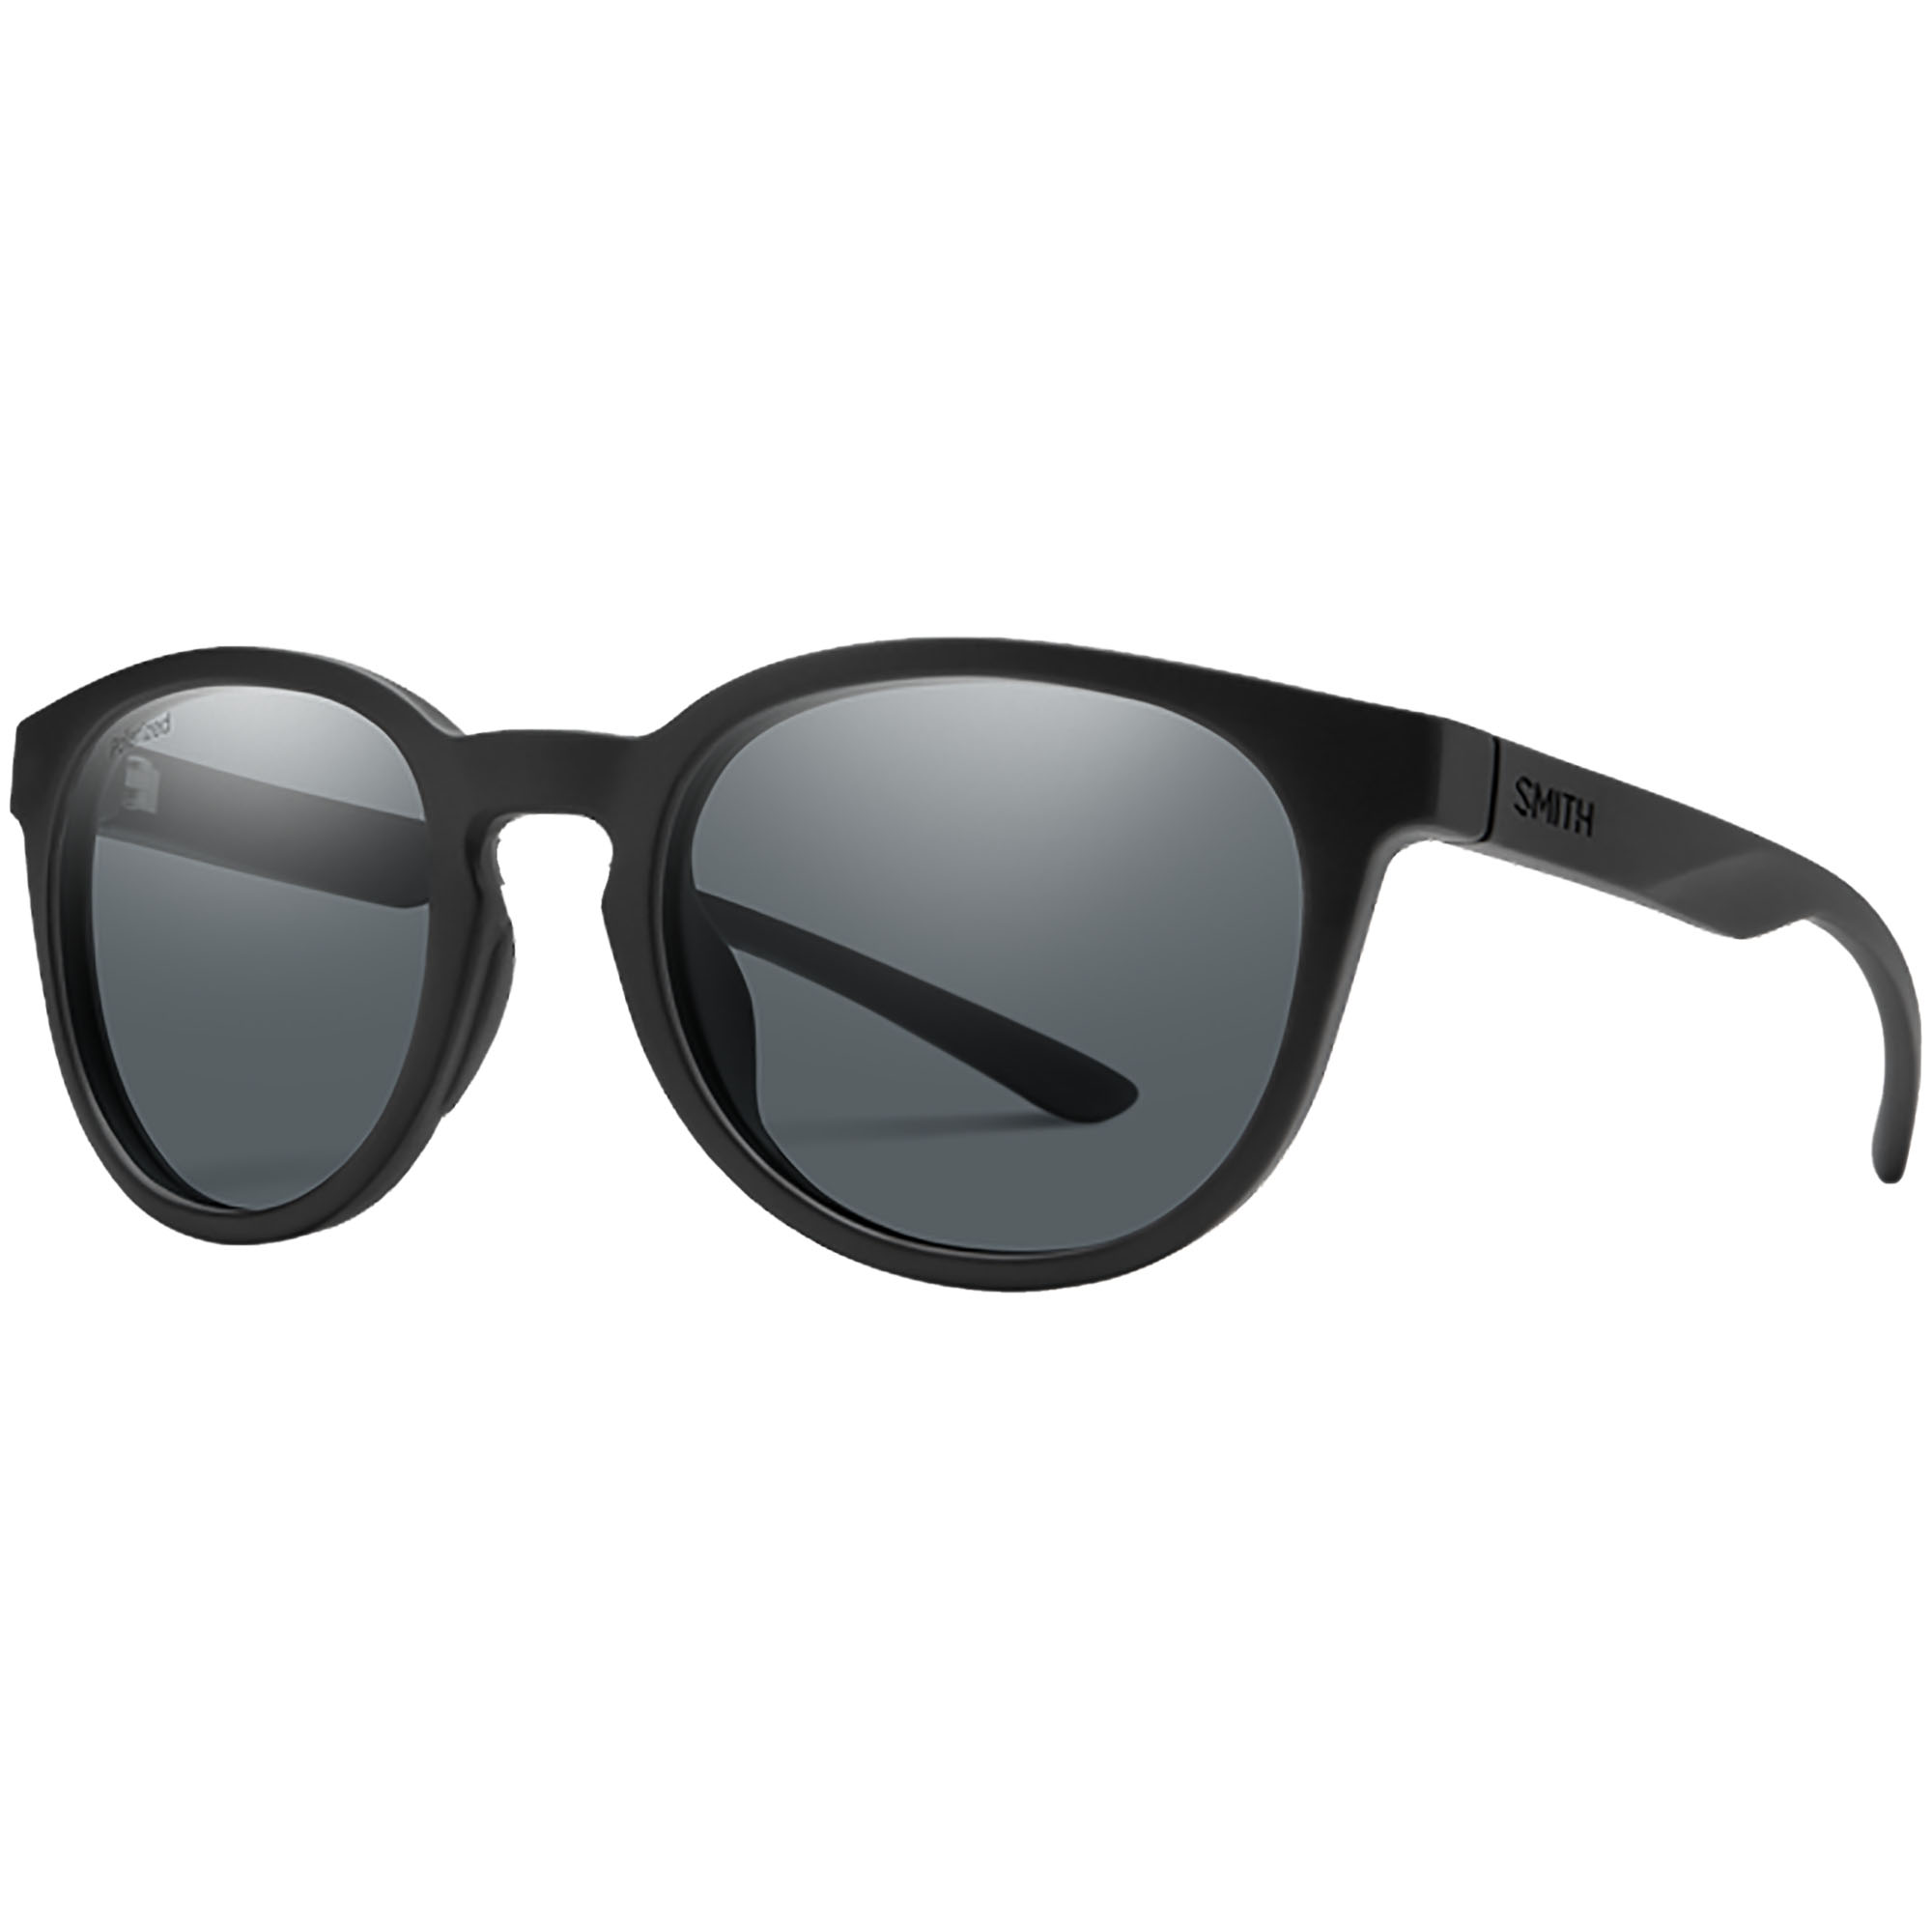 Details more than 75 flat front sunglasses latest